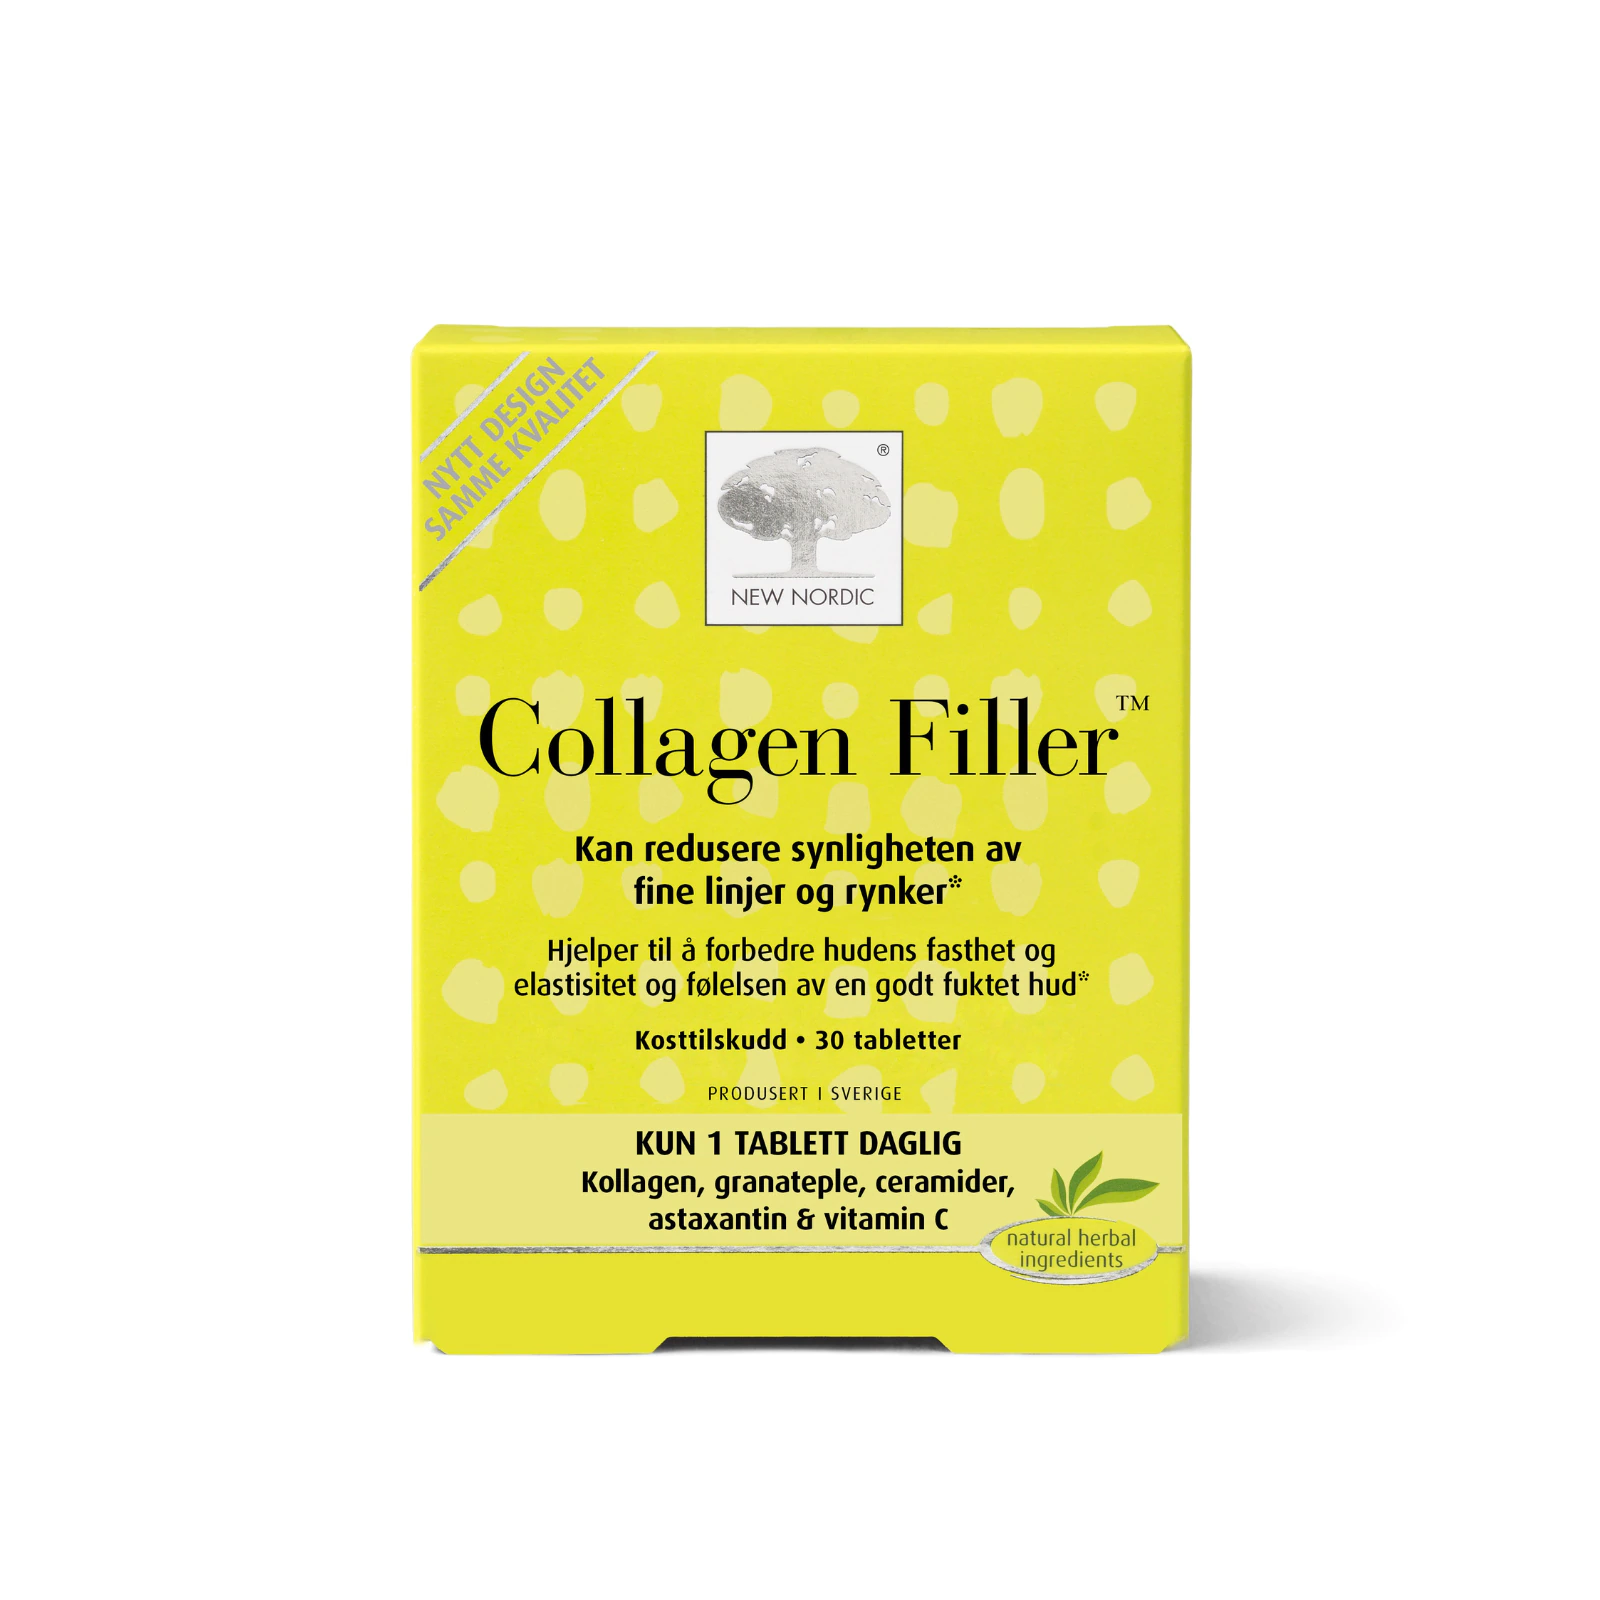 New Nordic Collagen Filler one-a-day